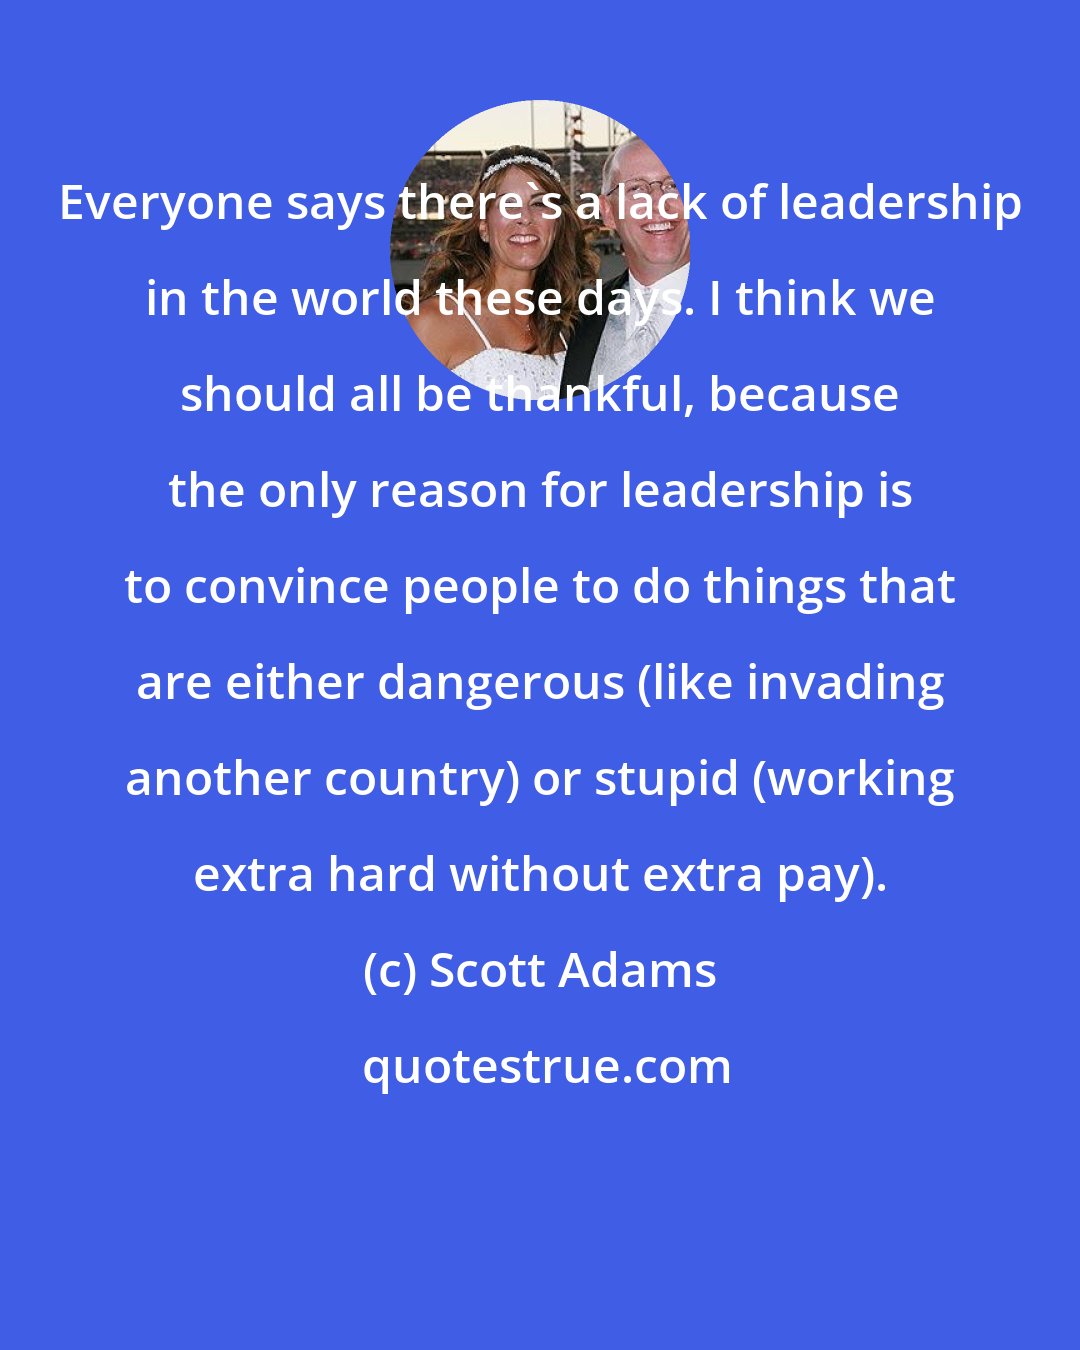 Scott Adams: Everyone says there's a lack of leadership in the world these days. I think we should all be thankful, because the only reason for leadership is to convince people to do things that are either dangerous (like invading another country) or stupid (working extra hard without extra pay).